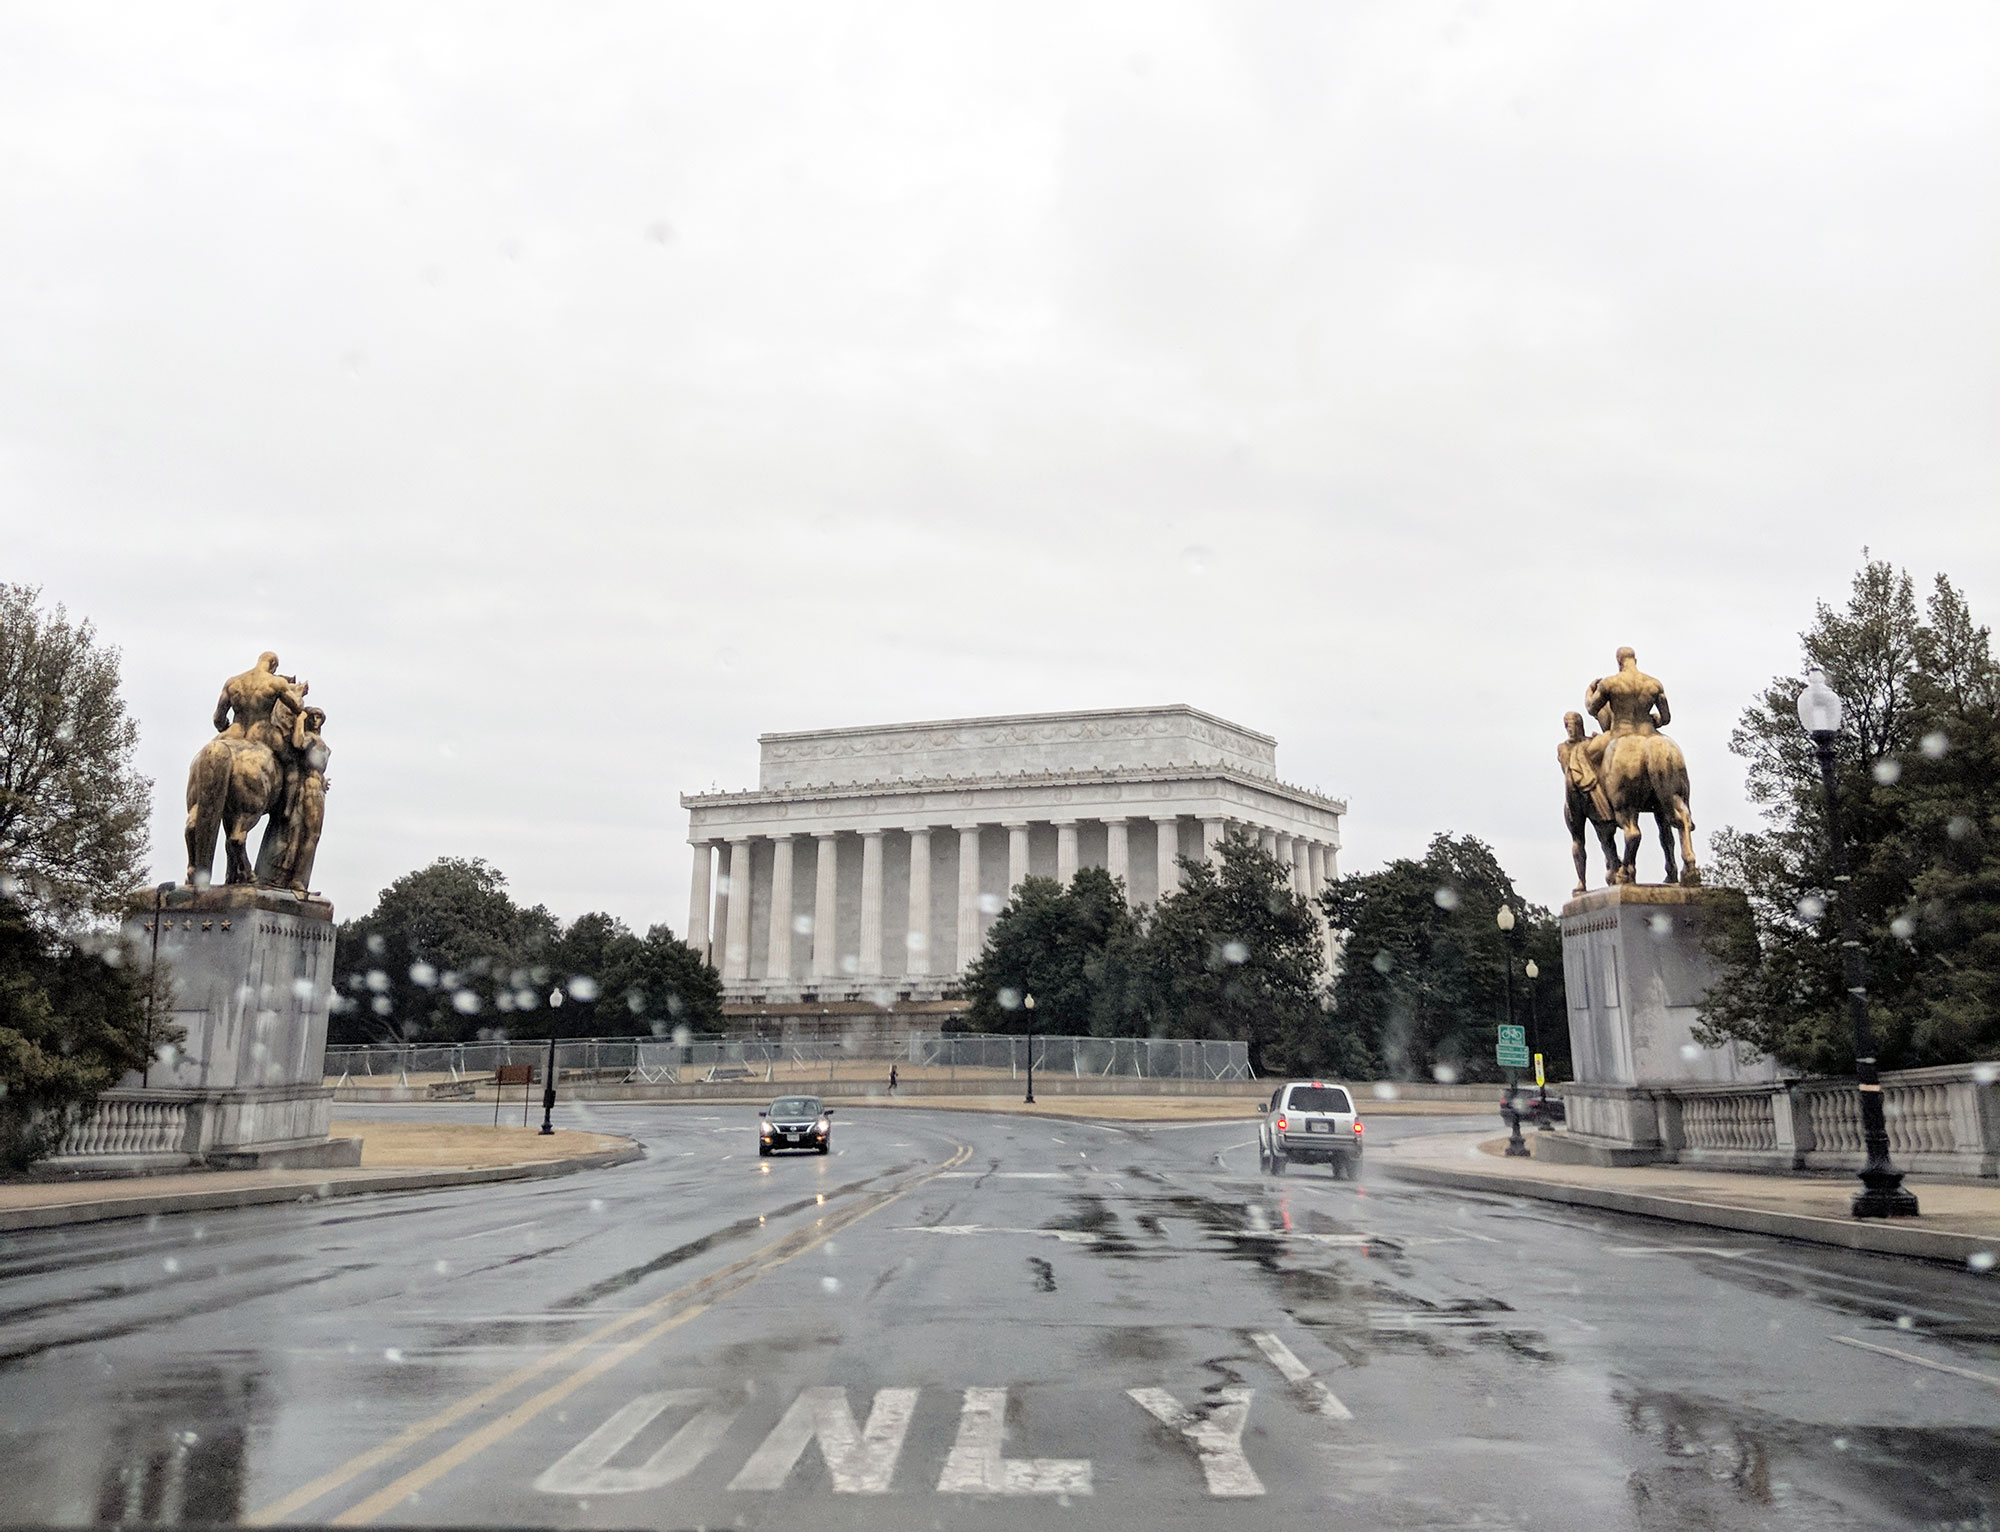 The Lincoln Memorial in Washington D.C., on a rainy weekend afternoon.